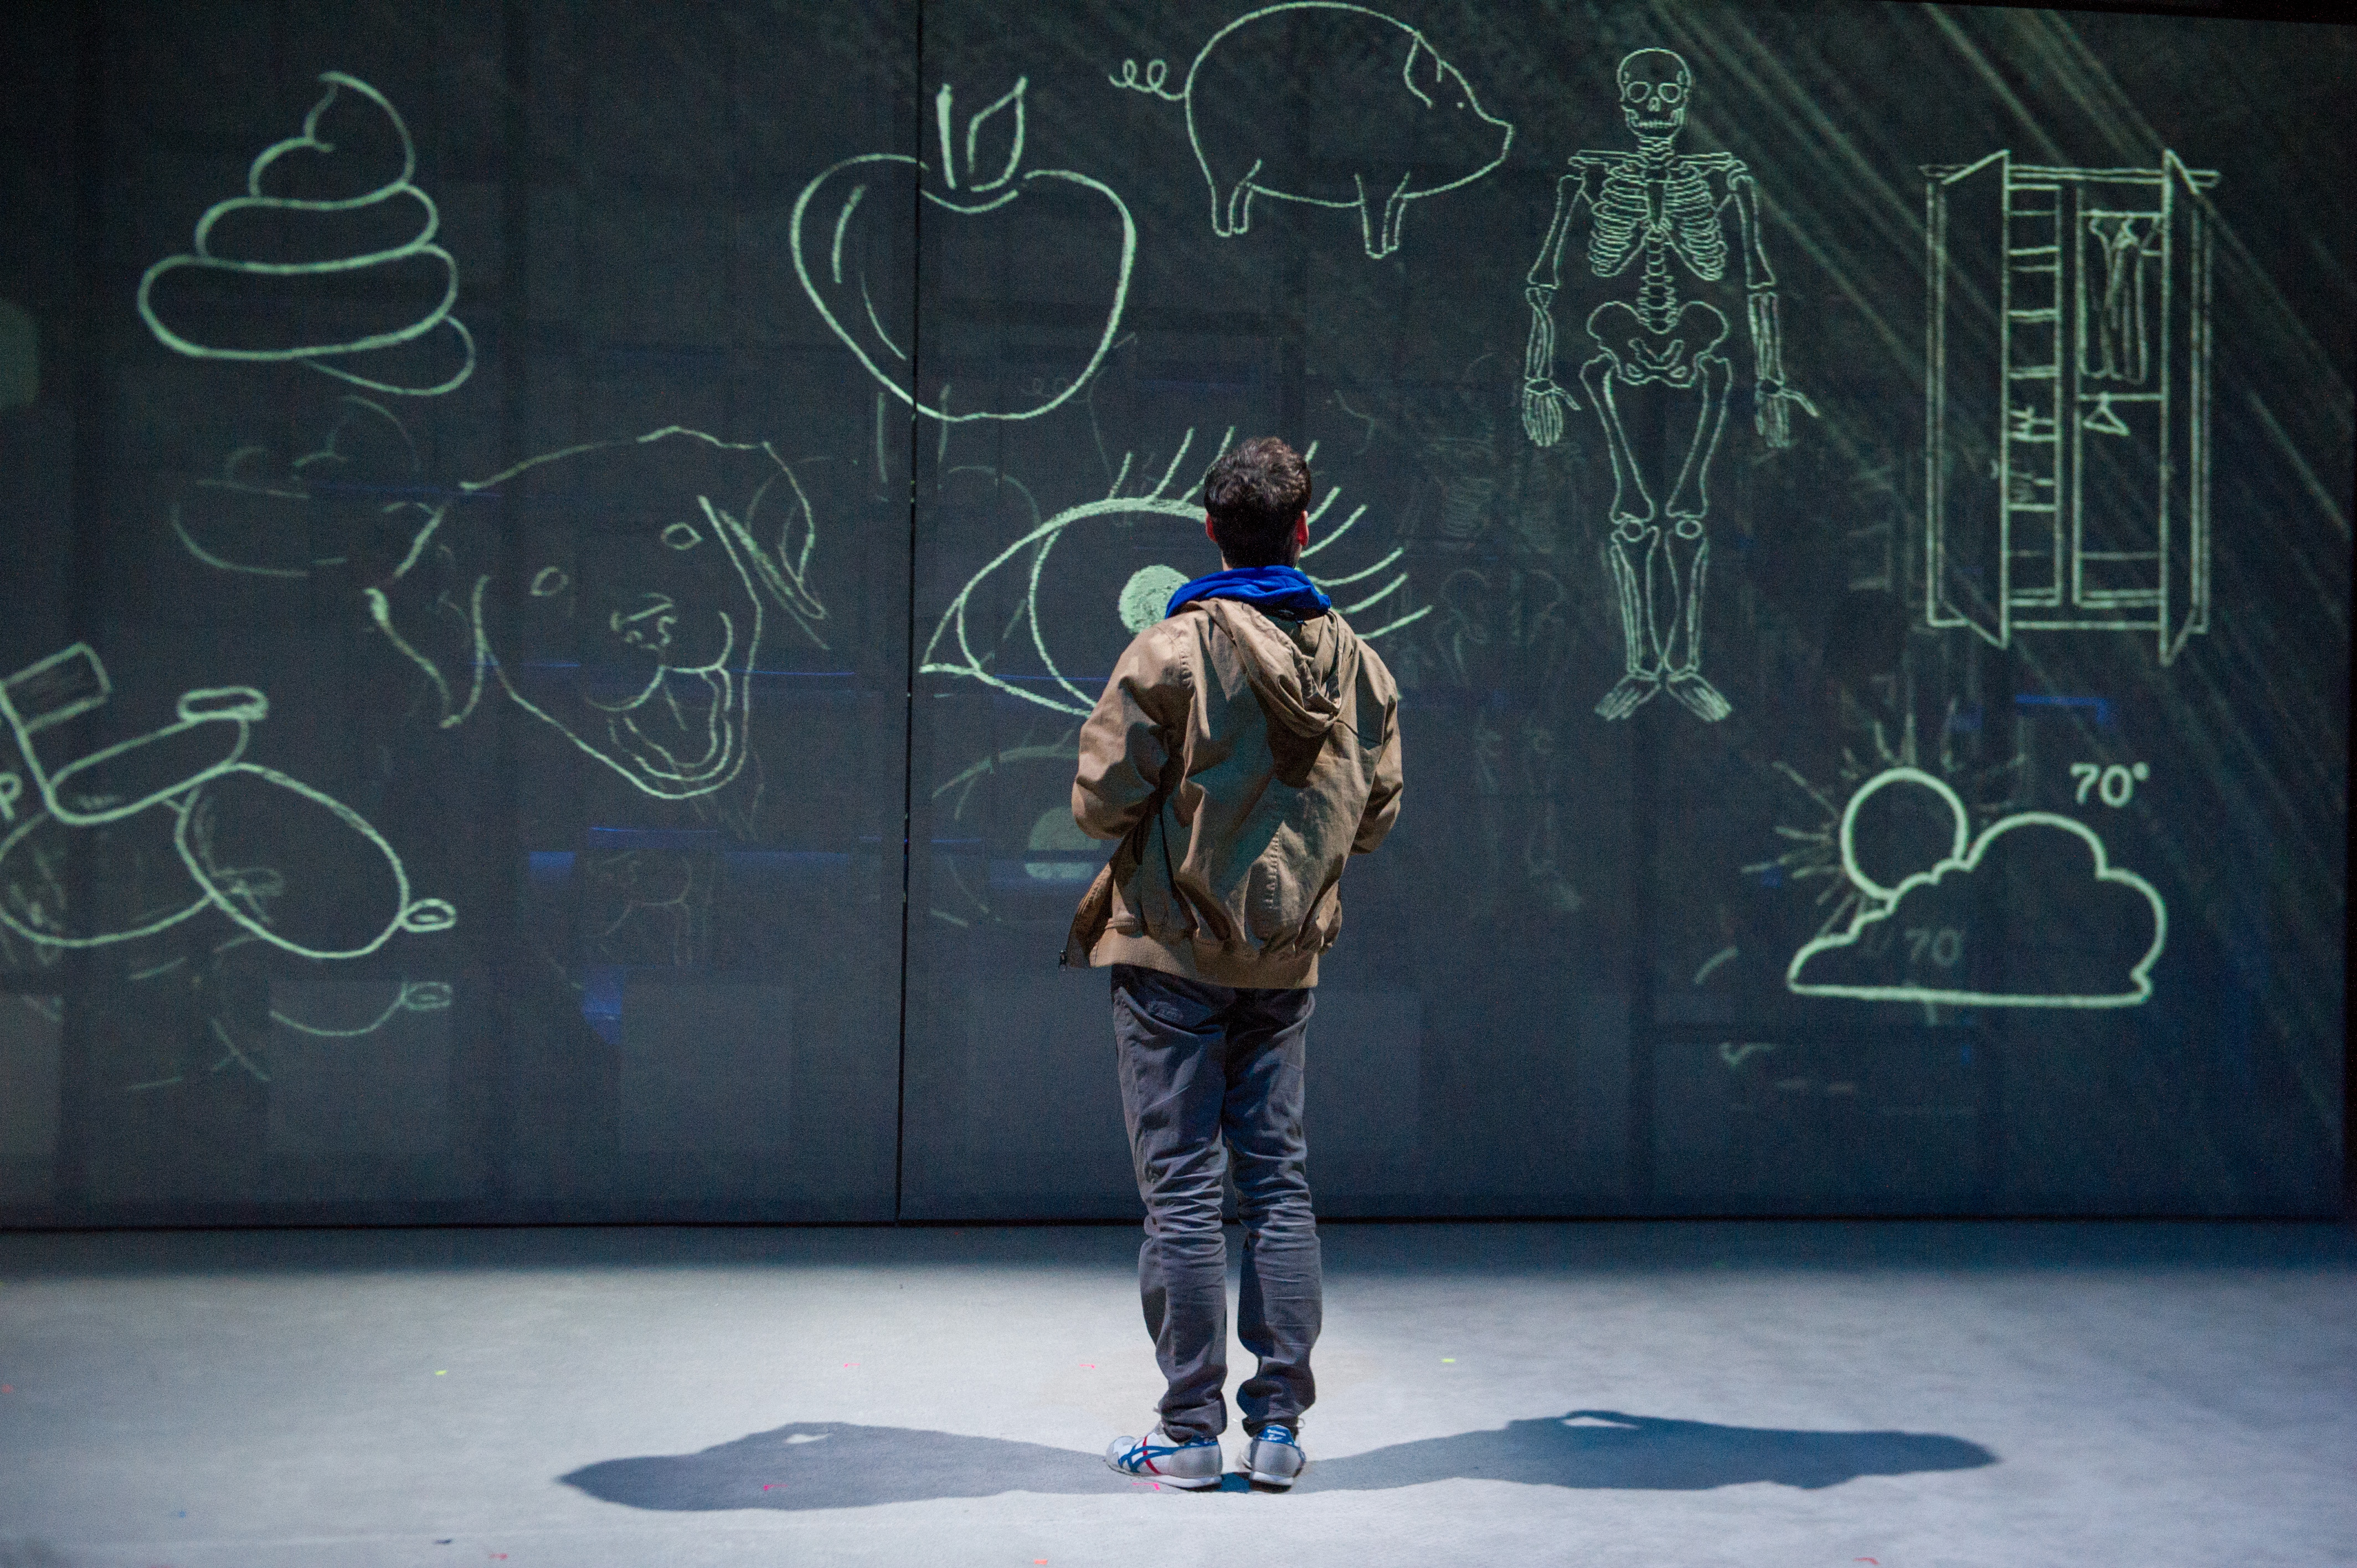 Curious Incident of the Dog in the Night-Time projections image